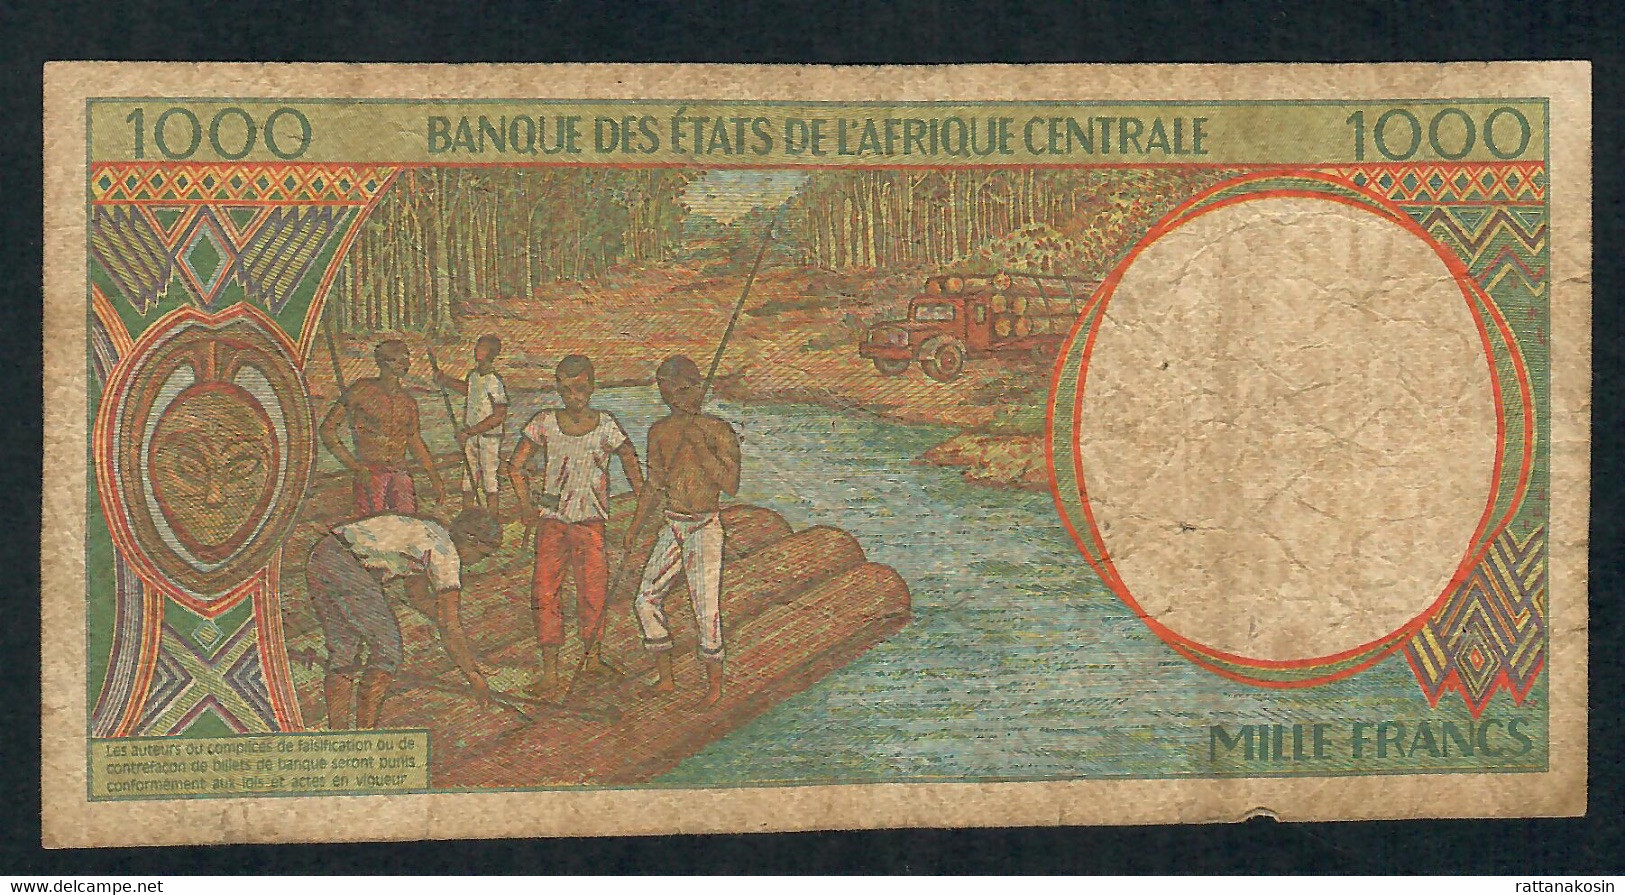 CENTRAL AFRICAN STATES GABON P402Lc  1000  FRANCS 1995  VF - Central African States